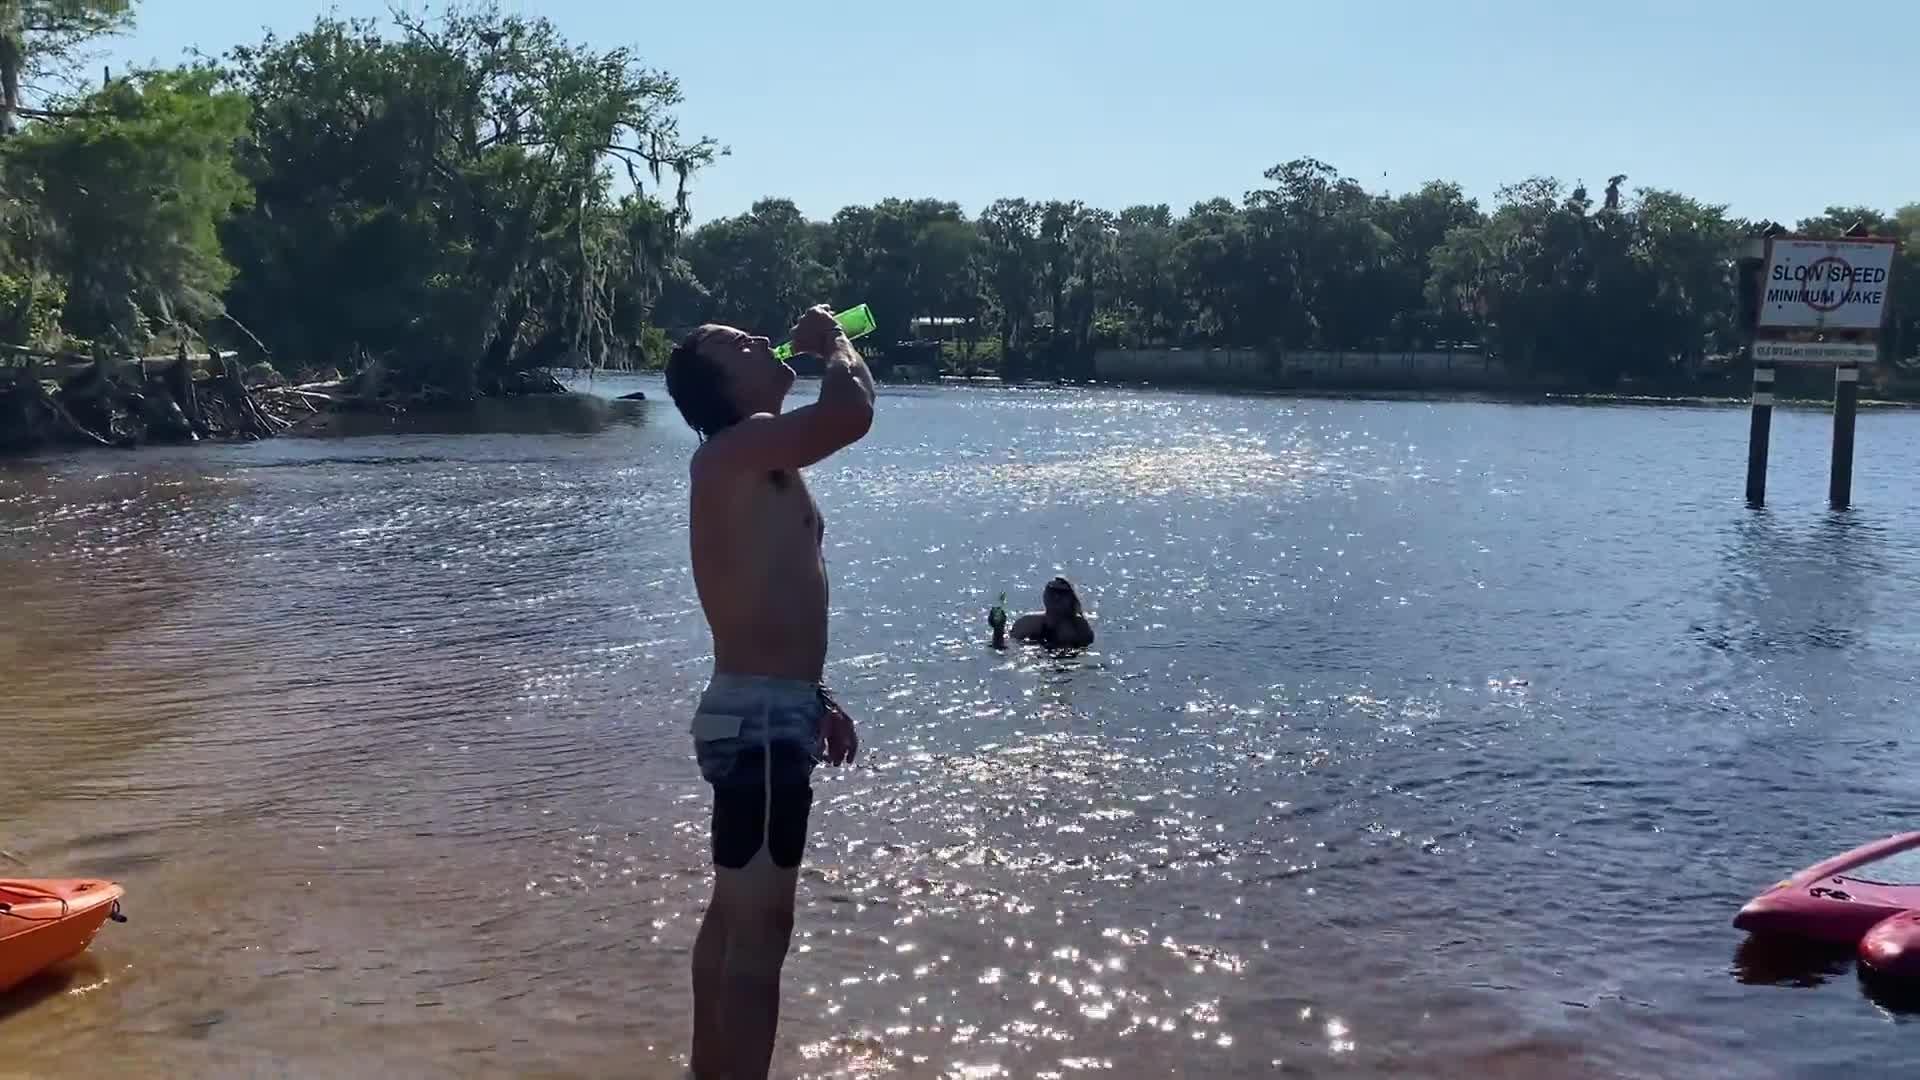 Guy Attempting to Backflip off Paddleboard Slips and Plops in Water